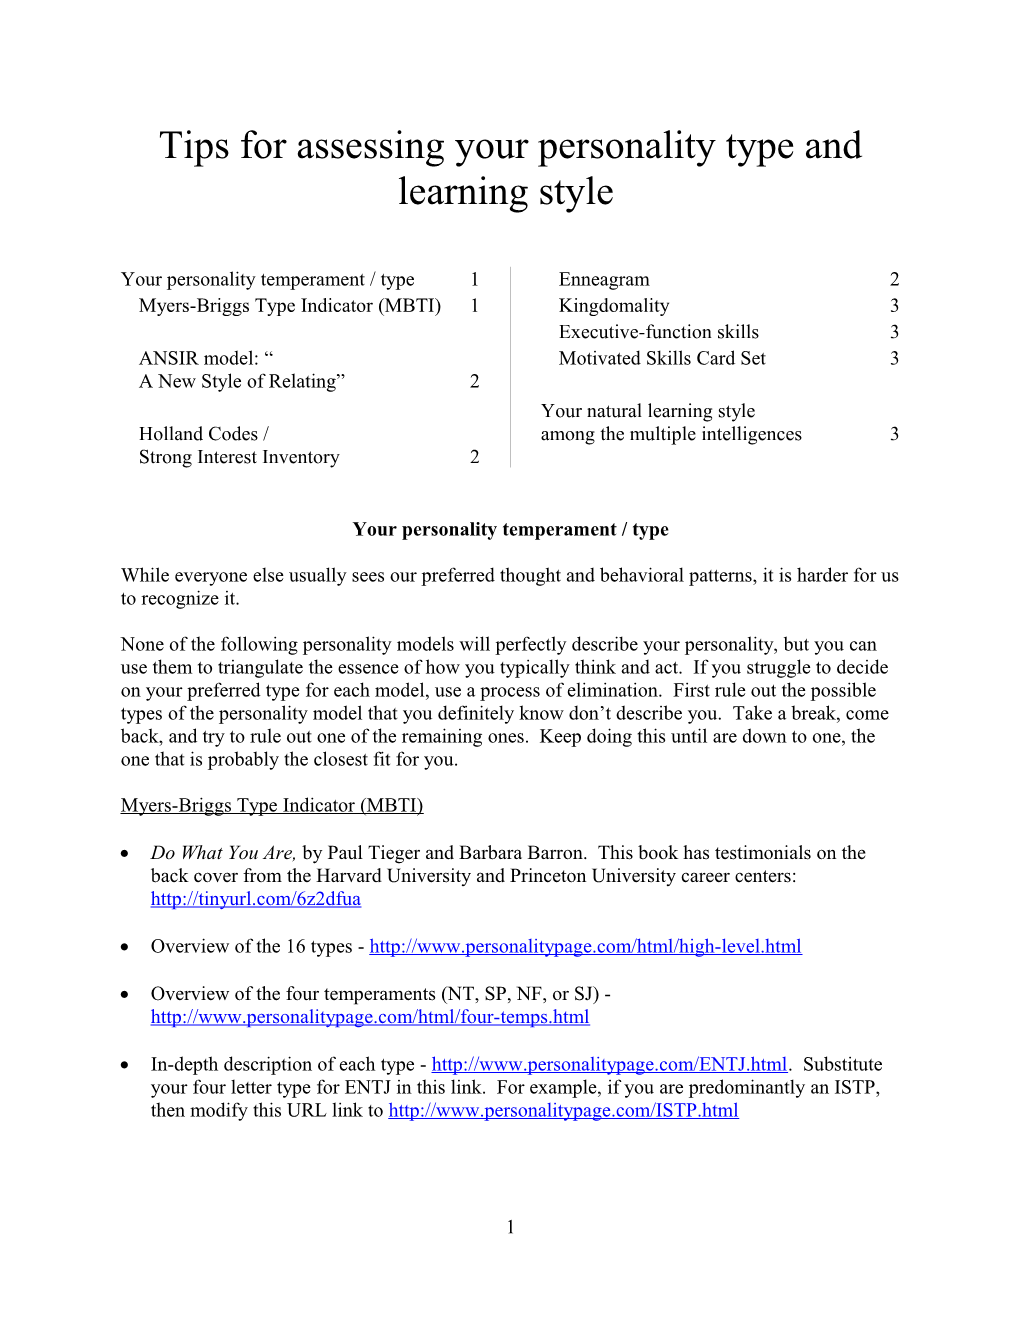 Tips for Assessingyour Personality Type and Learning Style